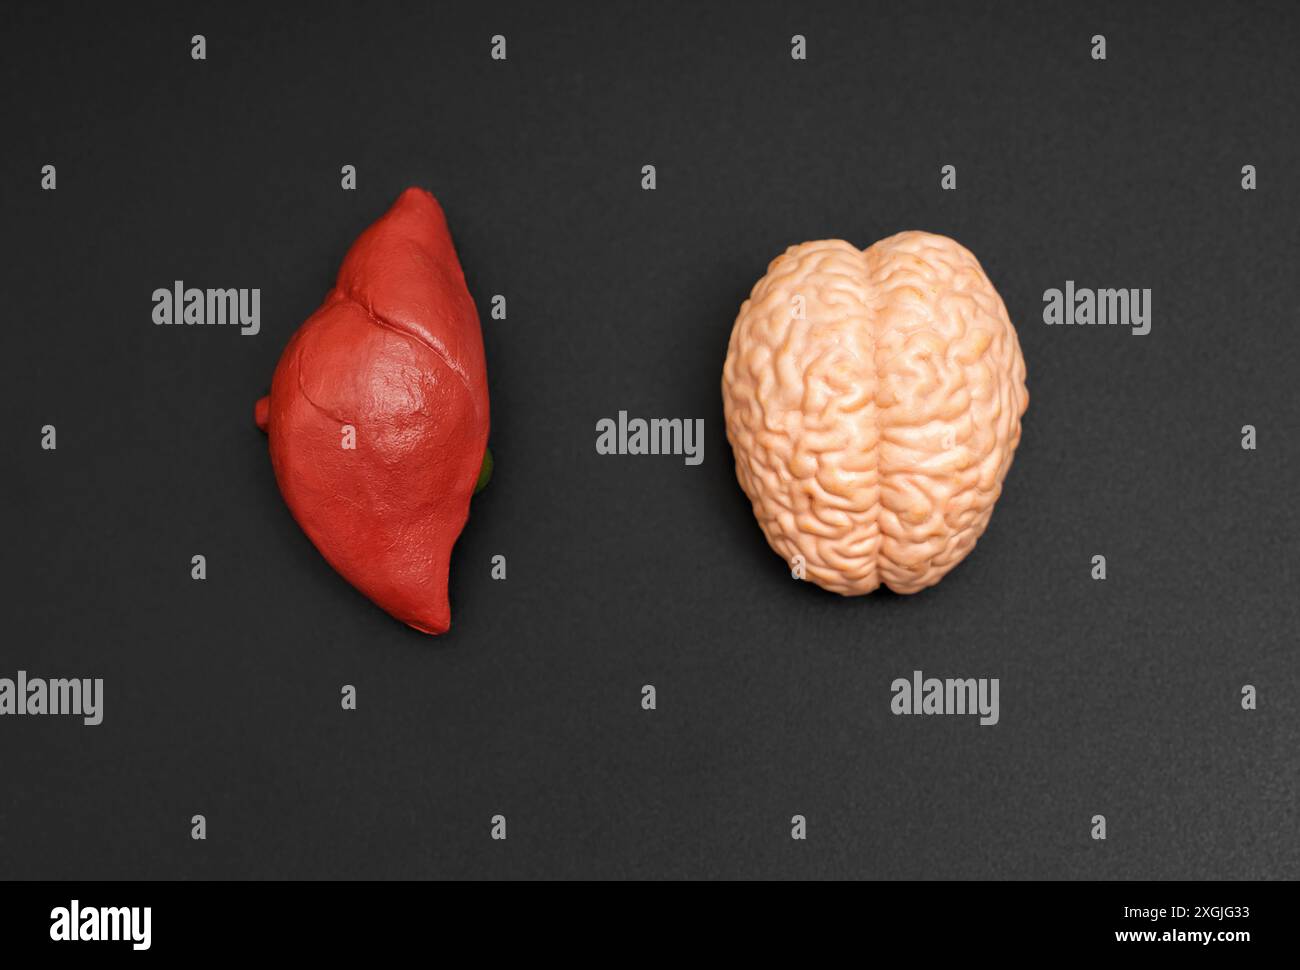 Medical model of human liver and brain placed side by side on black background. Suitable for healthcare and science concepts. Stock Photo